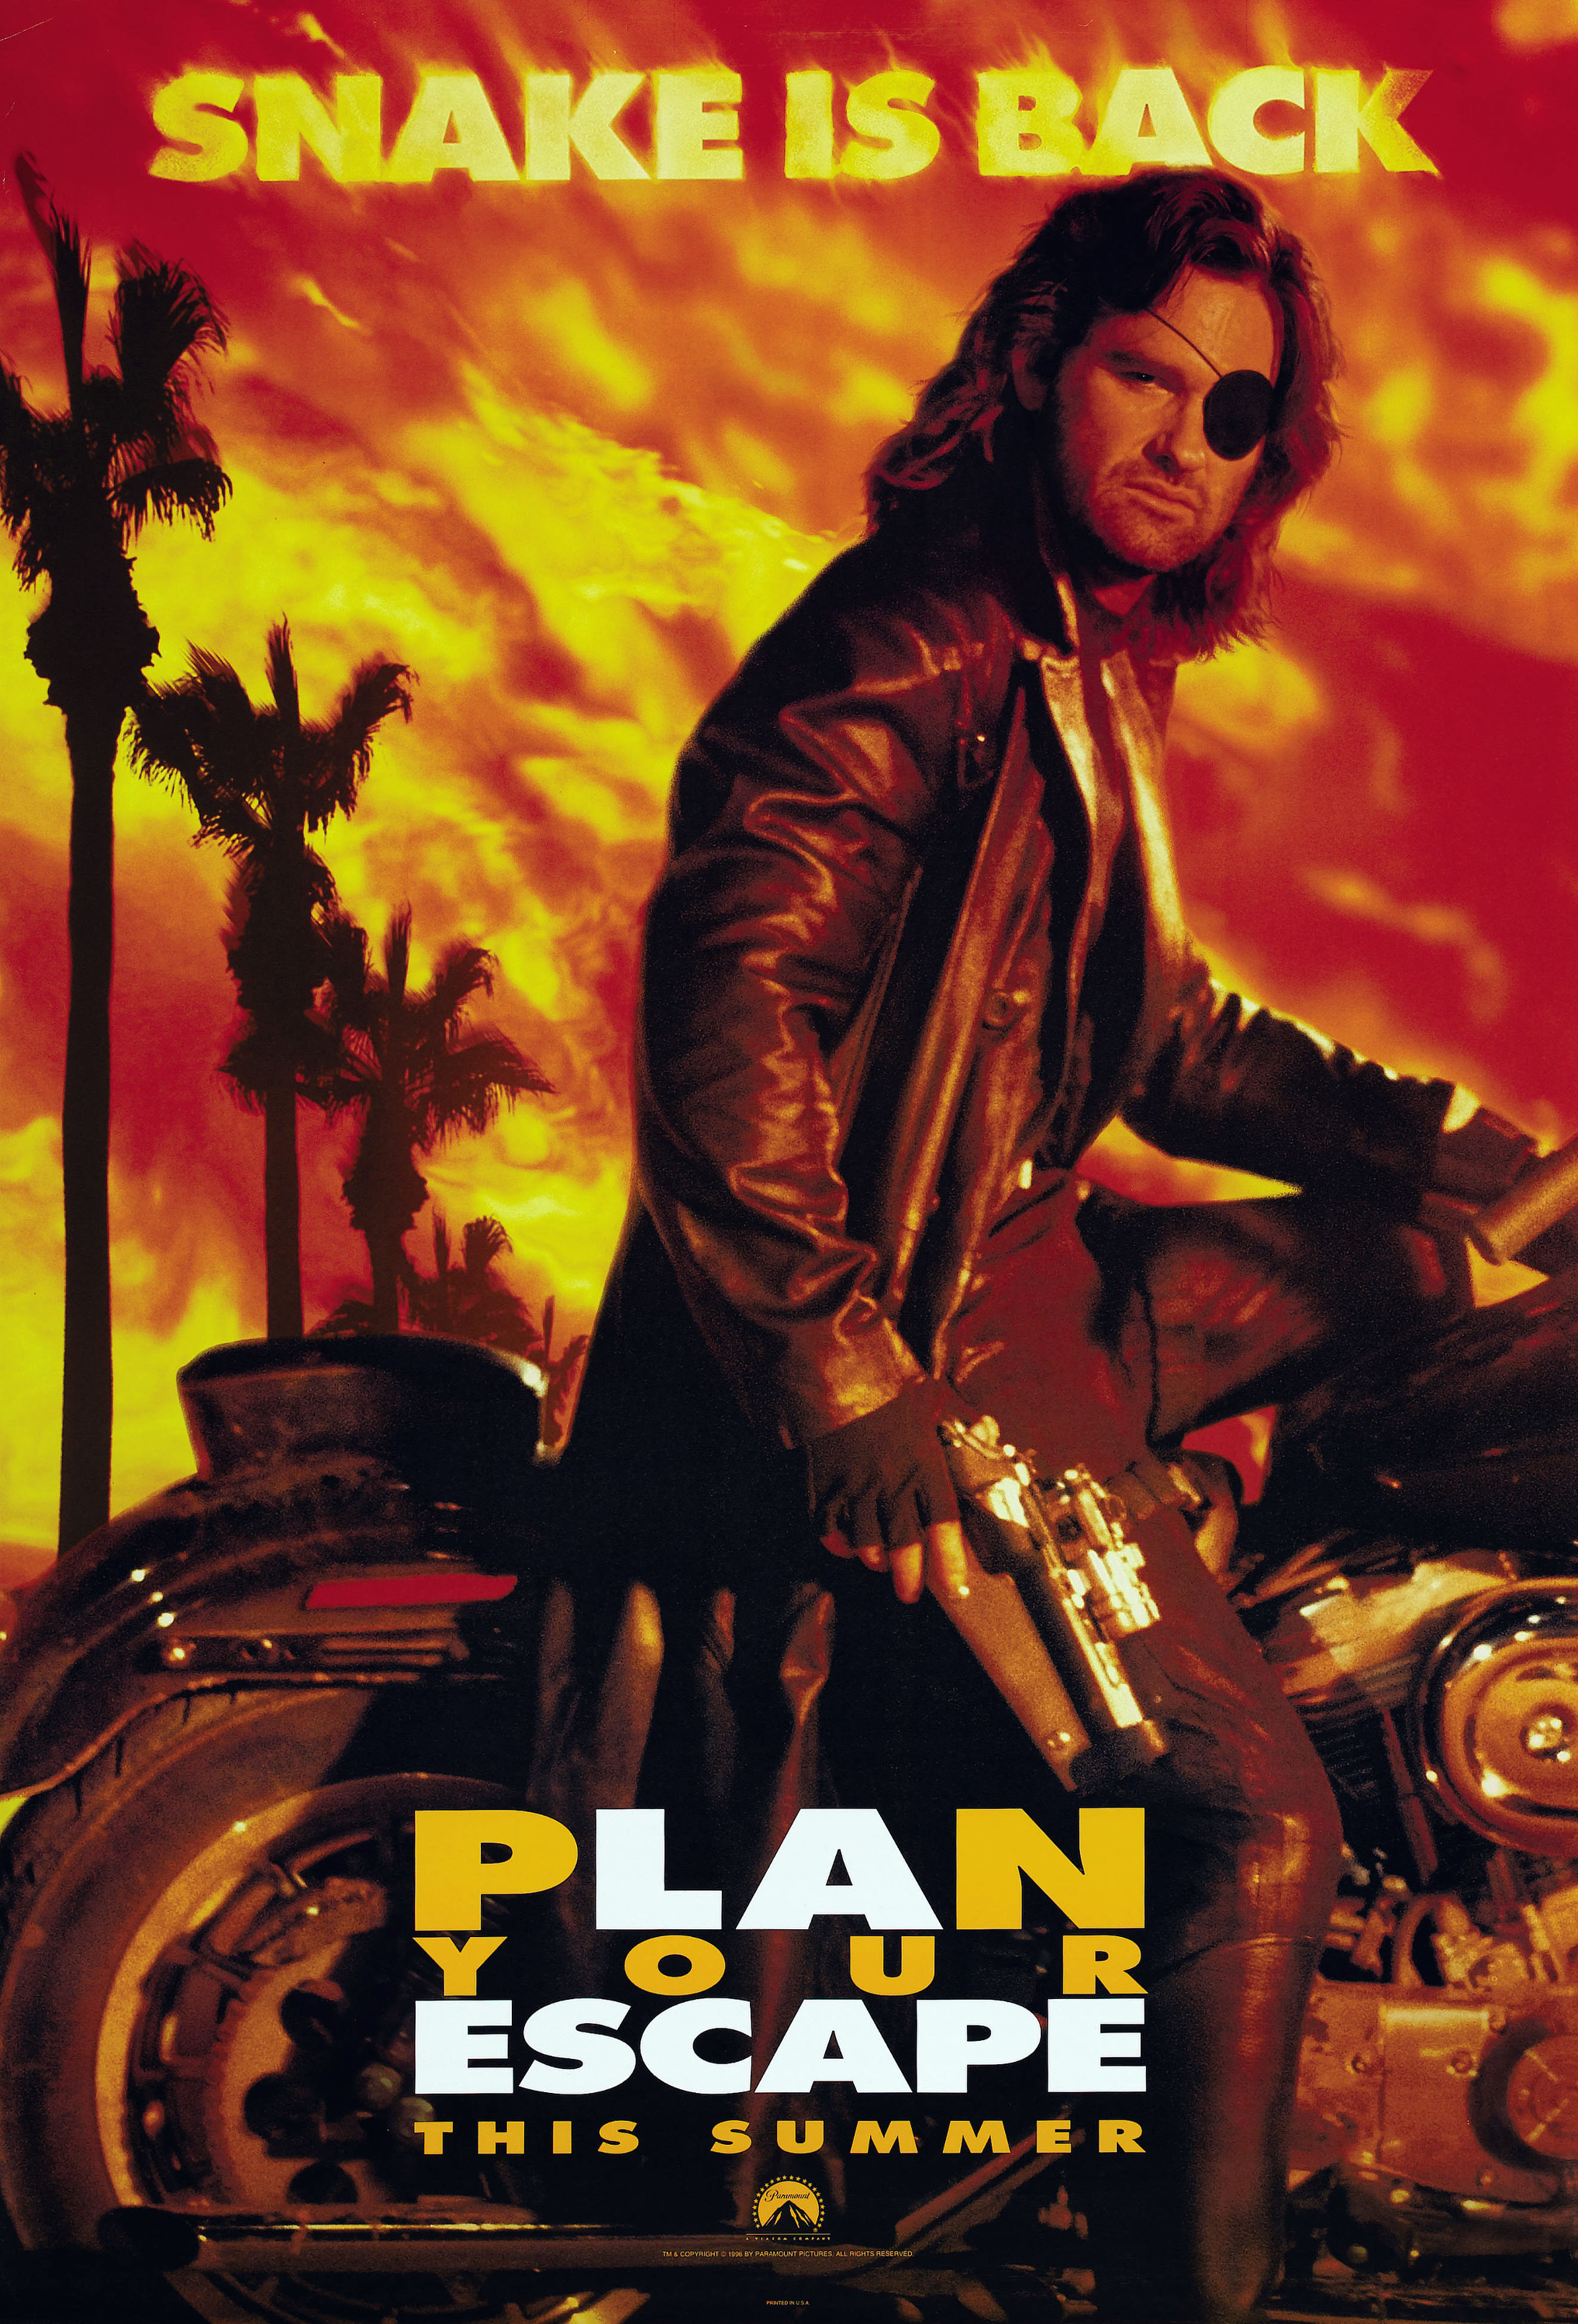 Escape From L.A. HD wallpapers, Desktop wallpaper - most viewed